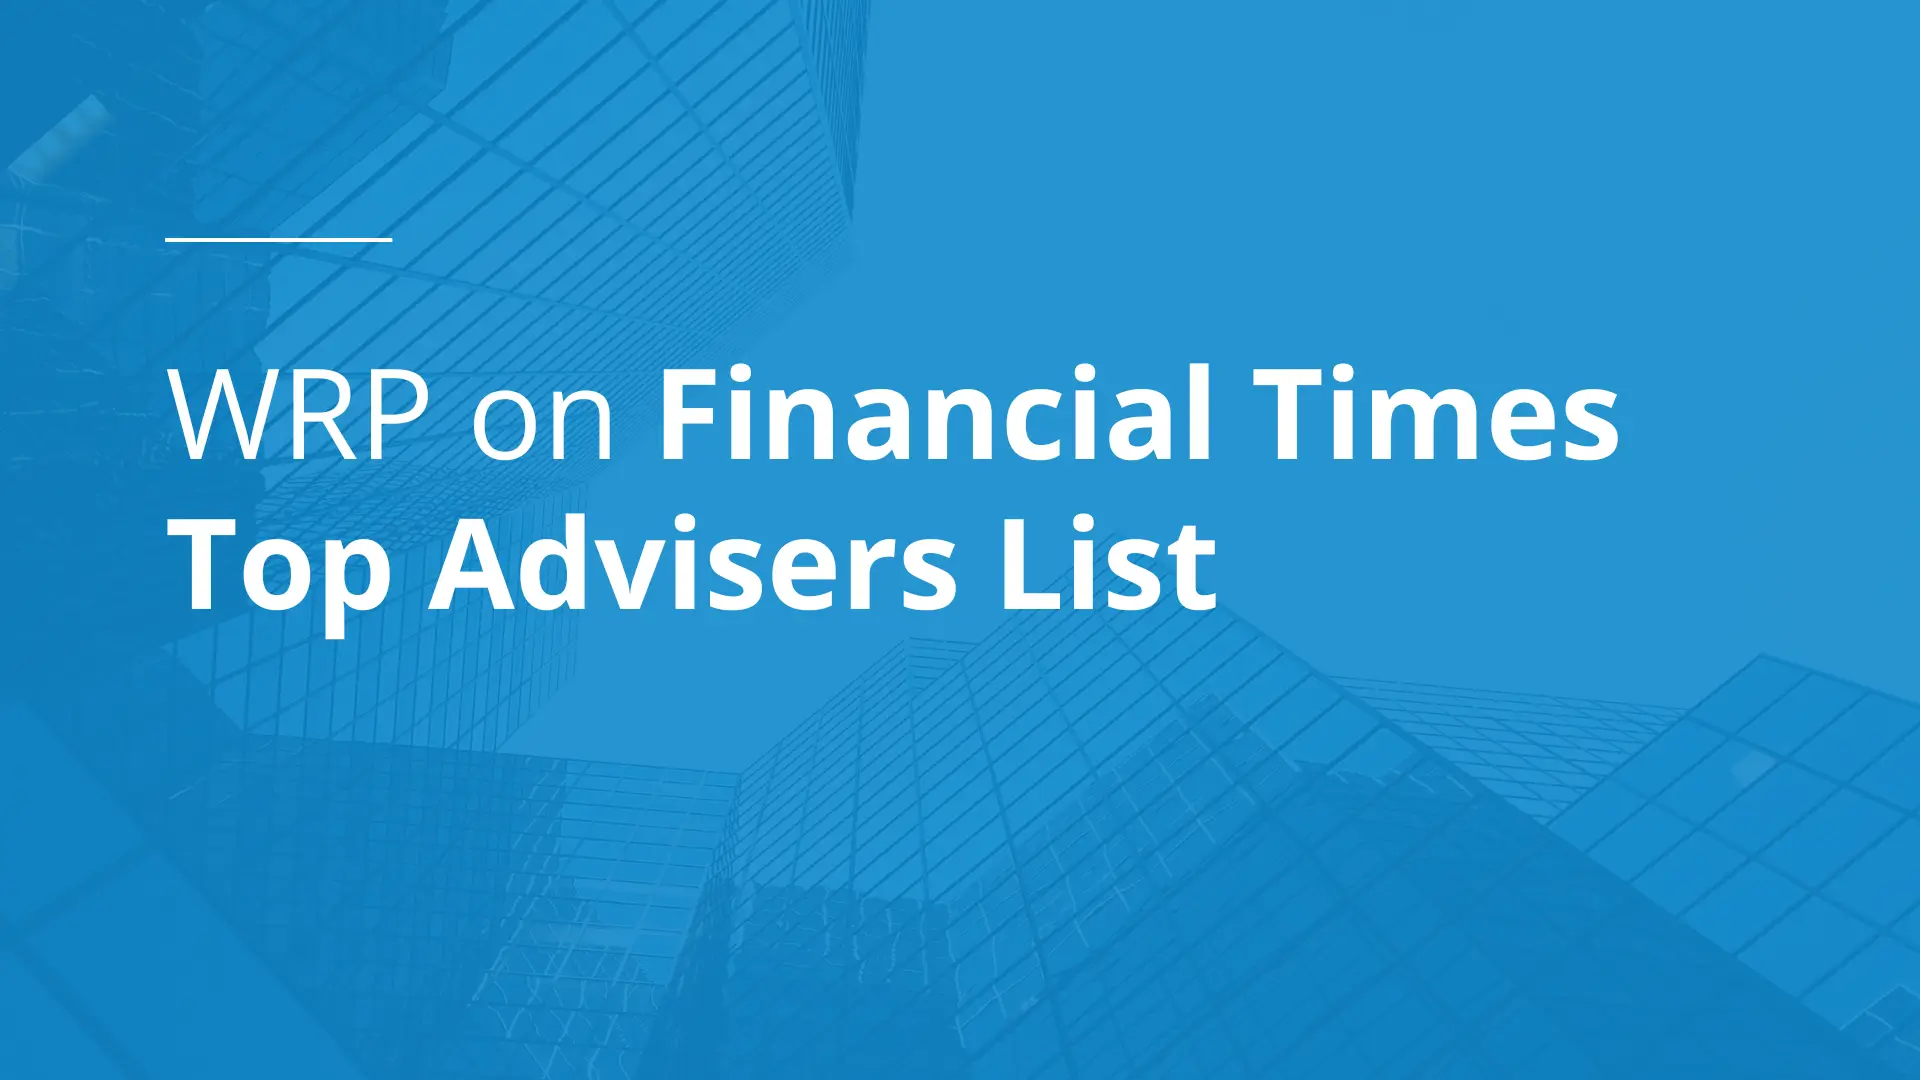 WRP on Financial Times Top Advisers List